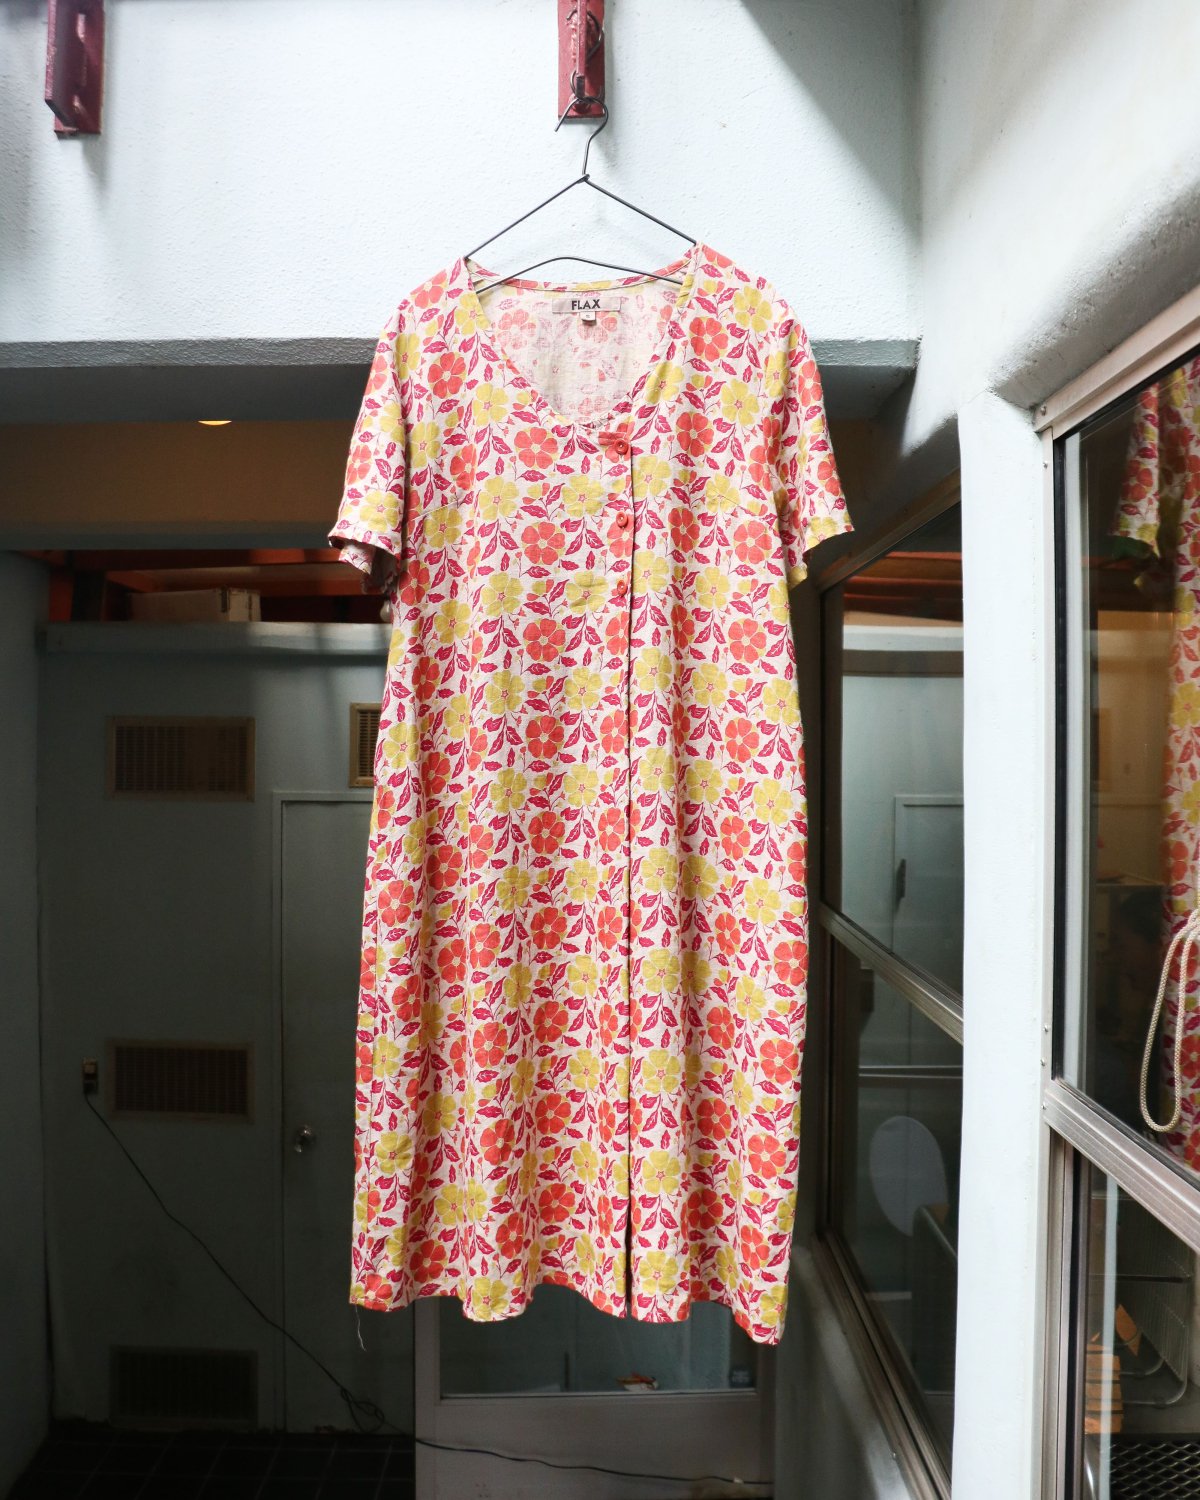 “FLAX” Flower Patterned Linen One Piece 